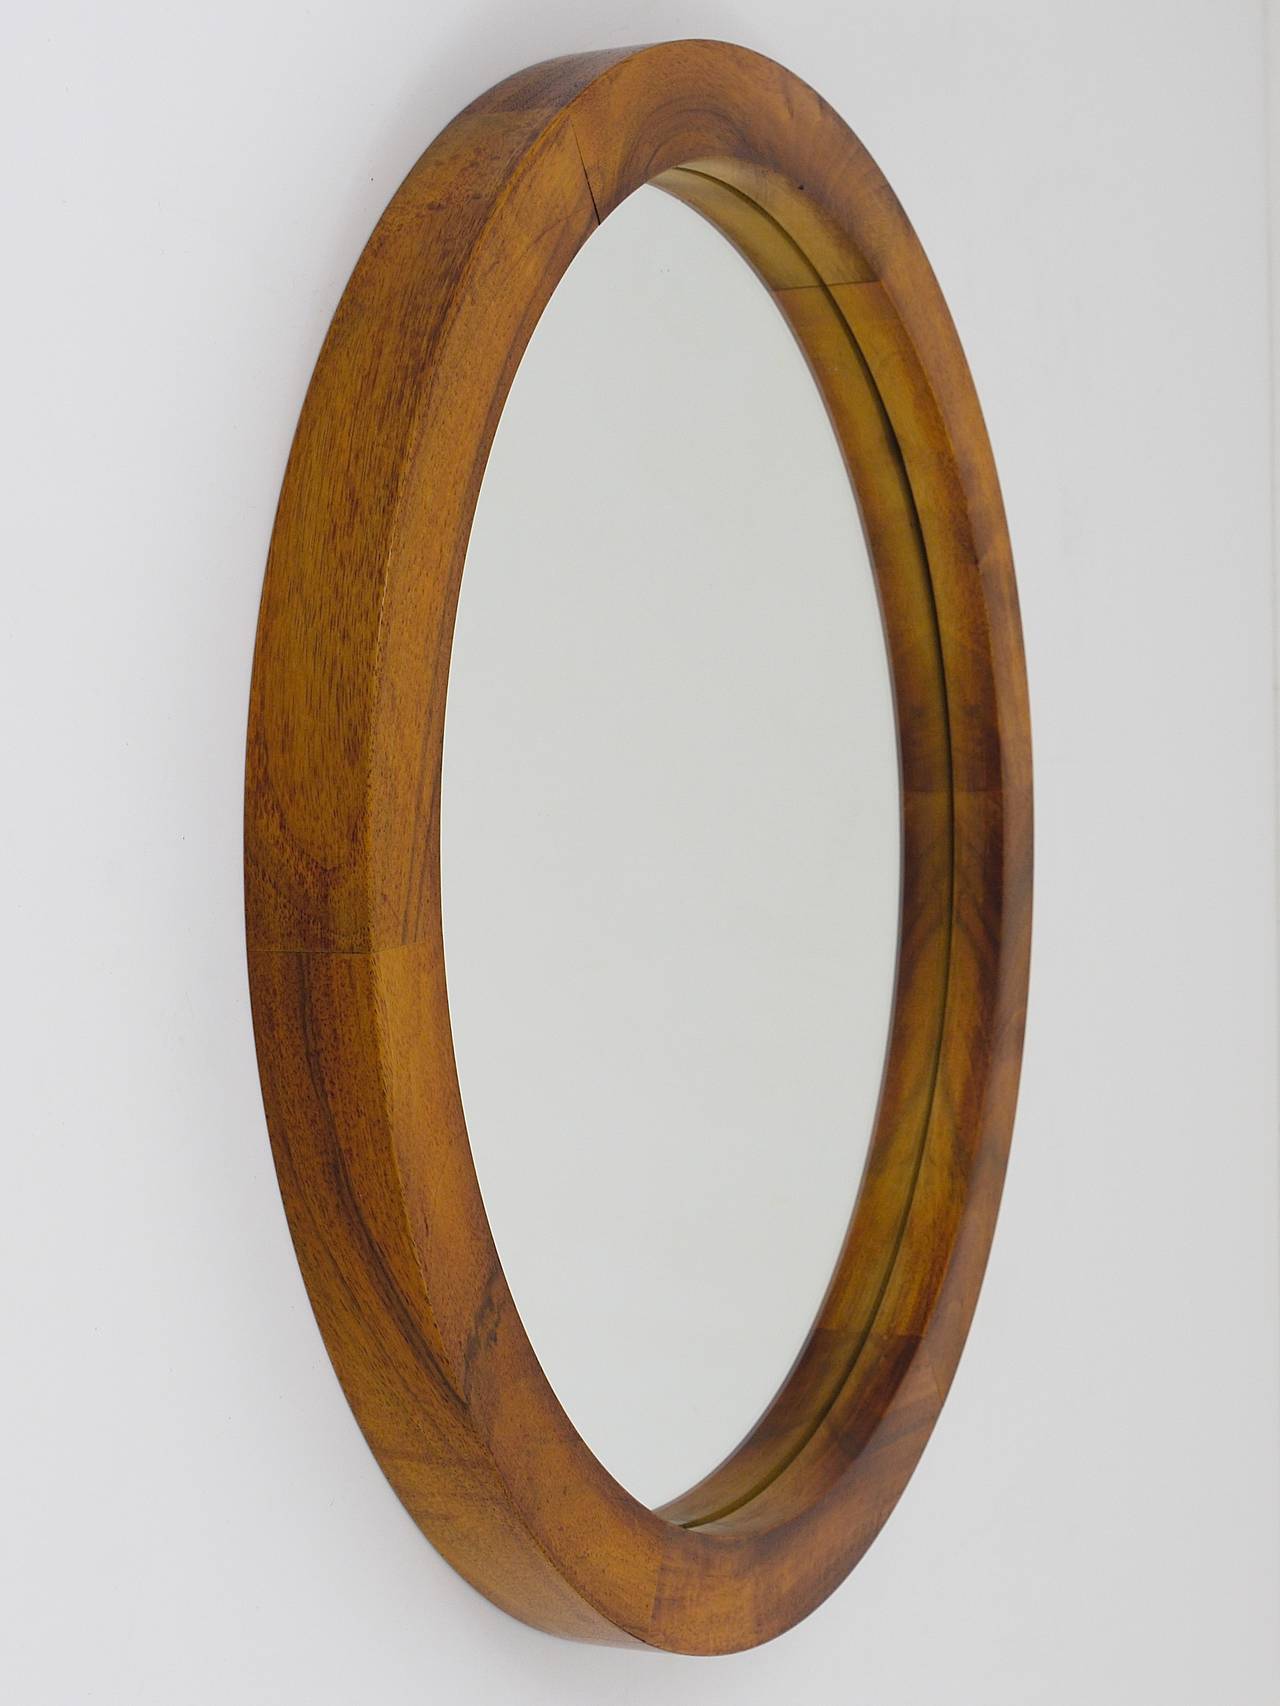 A beautiful modernist round wall mirror, designed and executed by Carl Aubock, Vienna, in the 1950s. The mirrors frames is made of walnut wood. Diameter 18